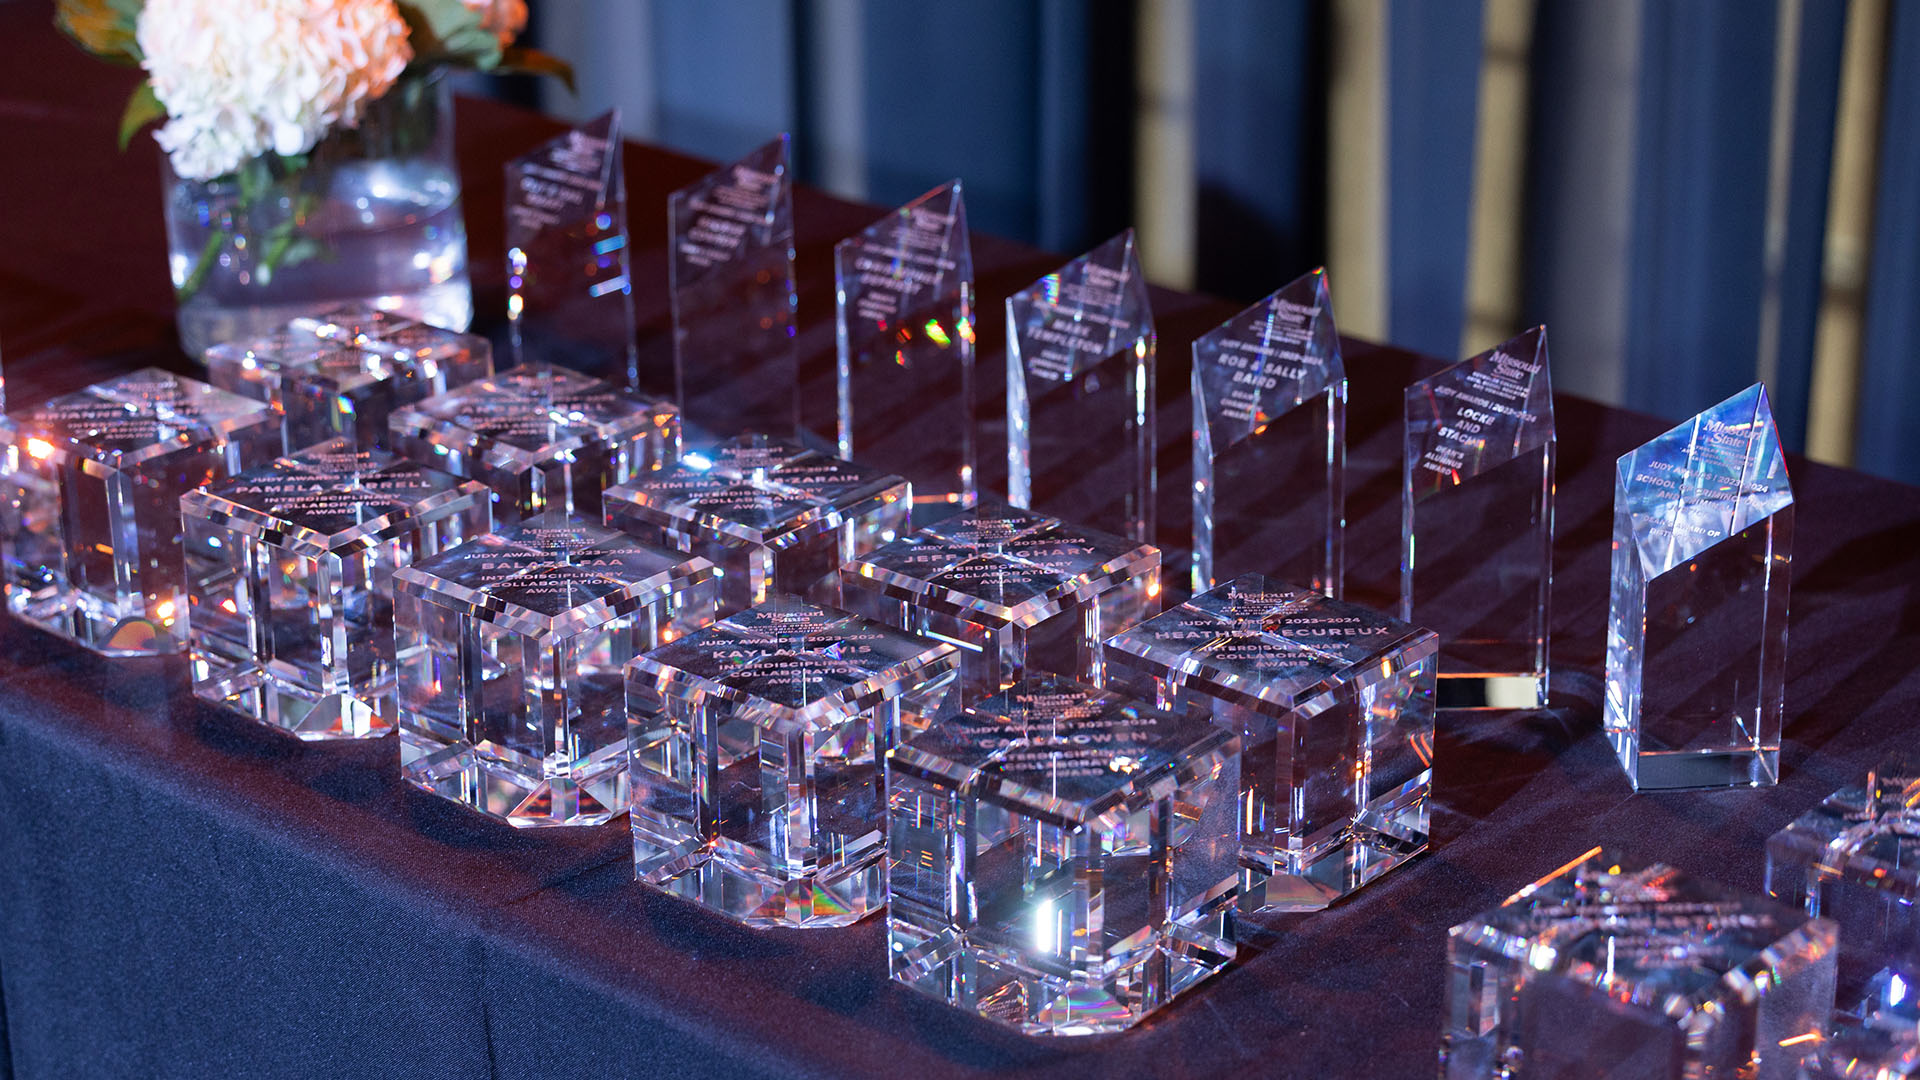 Award trophies lined up on stage table